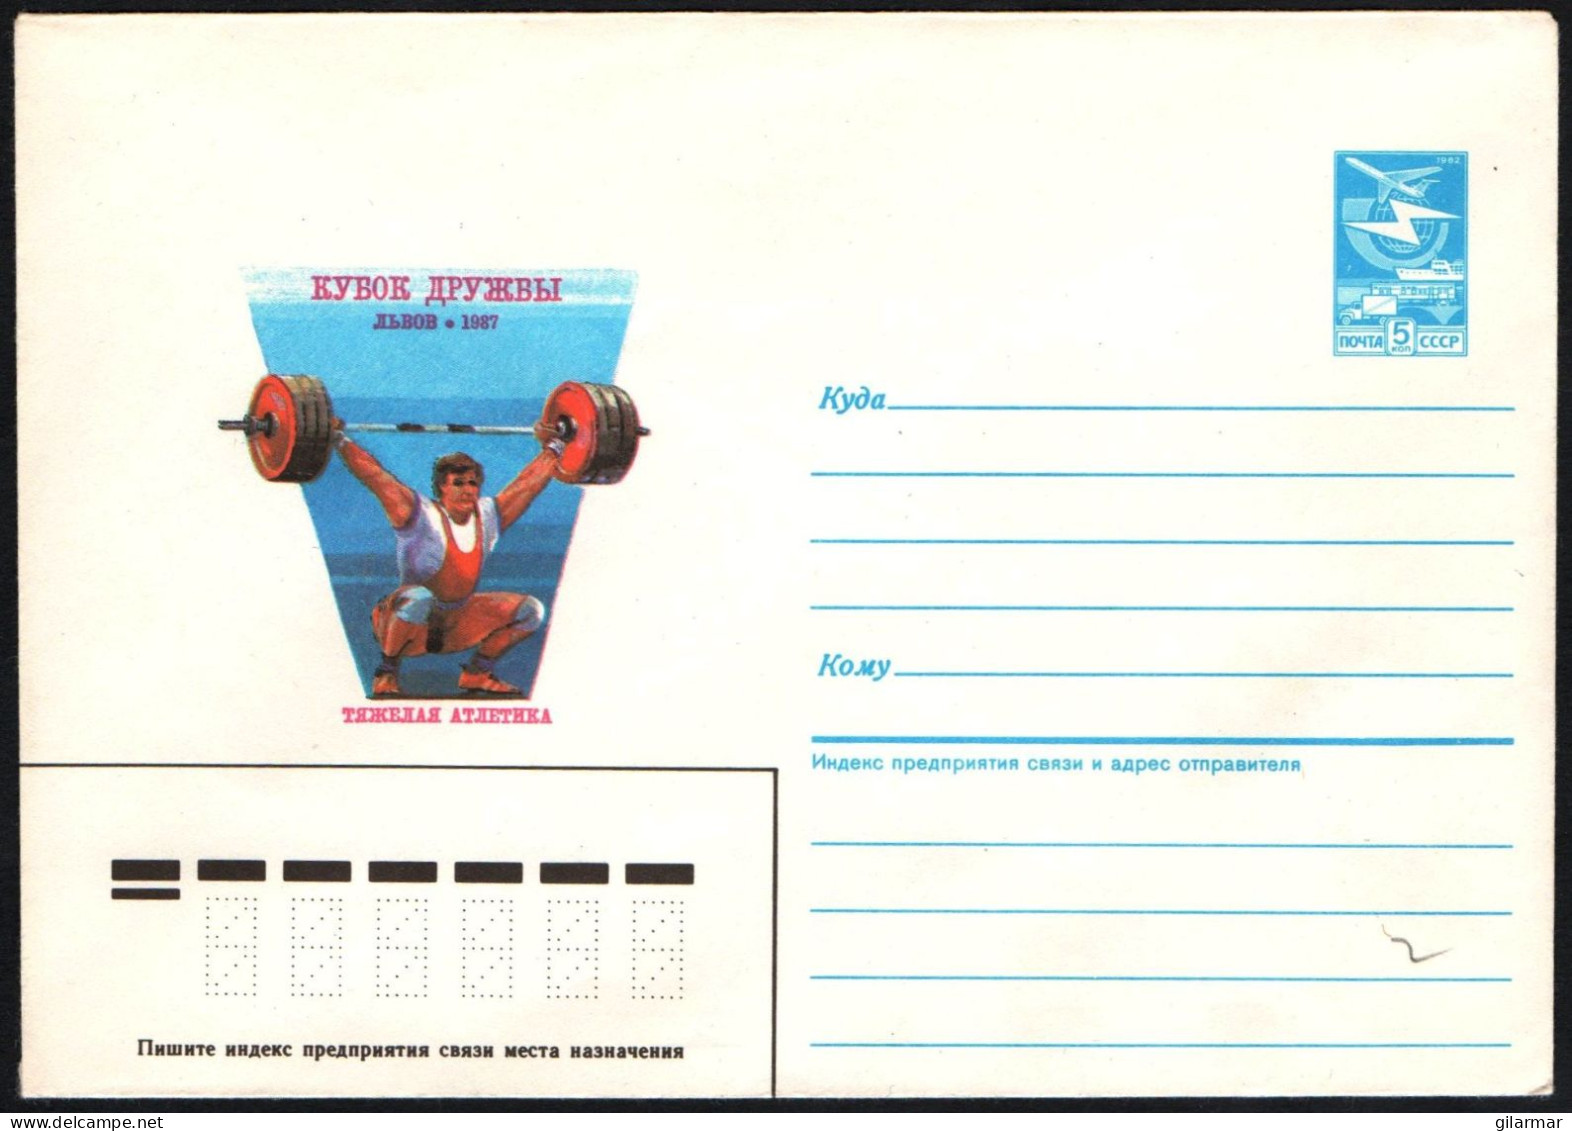 SOVIET UNION 1987 - FRIENDSHIP CUP - WEIGHTLIFTING - MINT POSTAL STATIONARY - G - Weightlifting